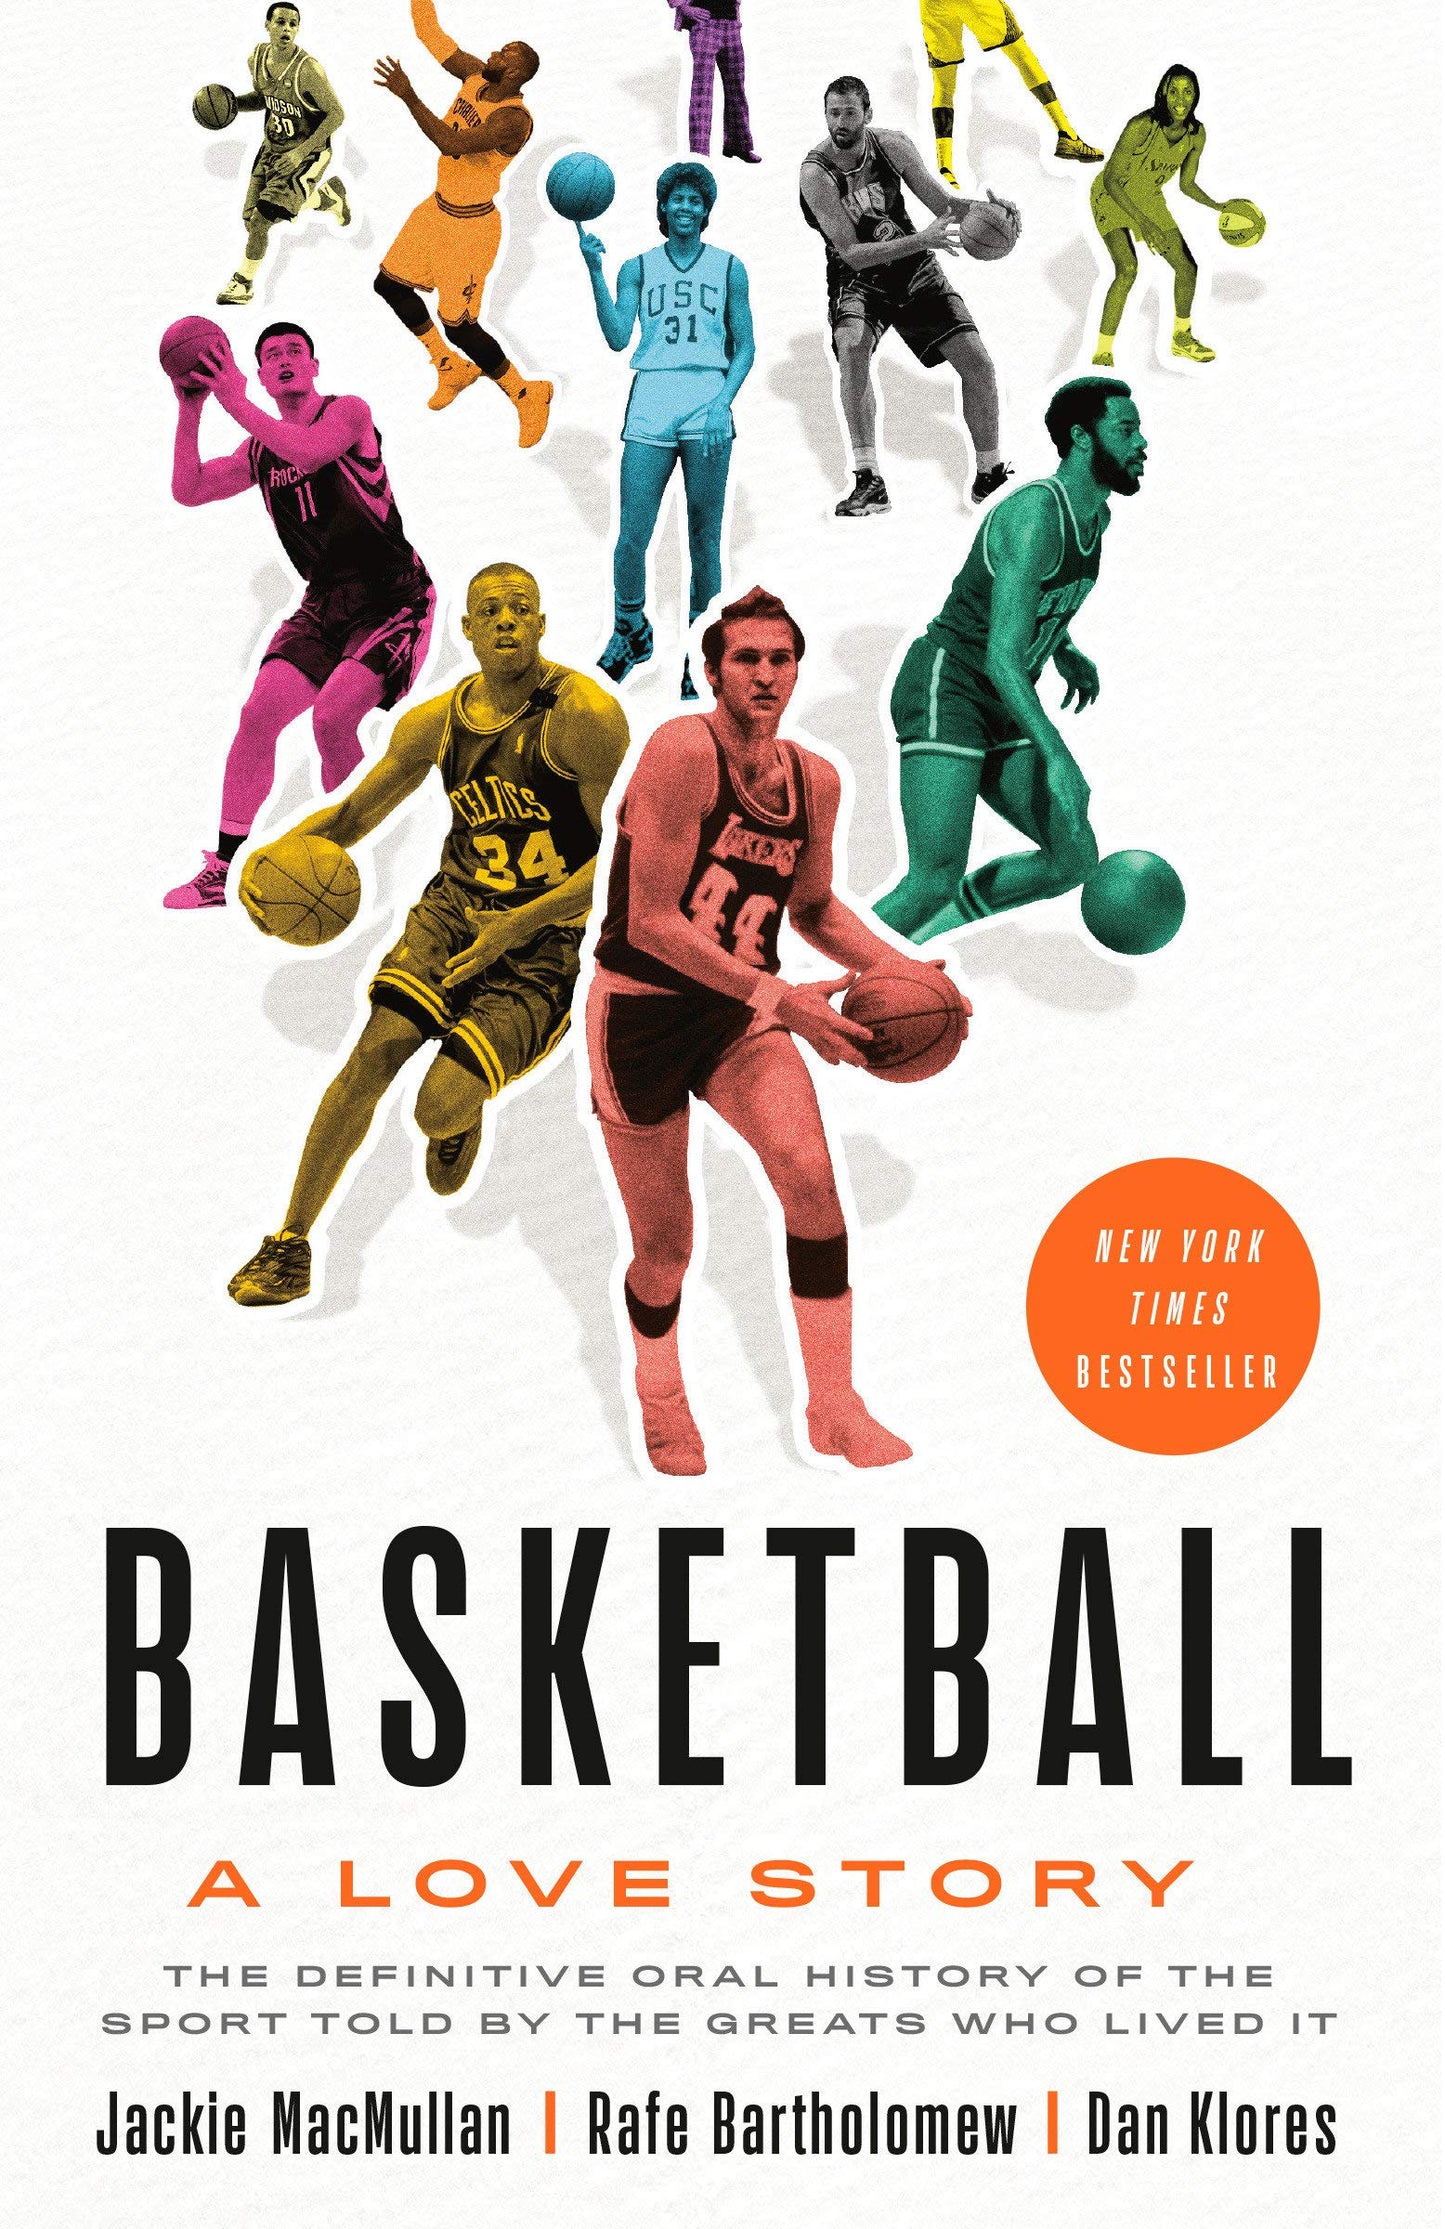 Basketball, A Love Story: The Definitive Oral History of the Sport, Told By the Greats Who Lived It